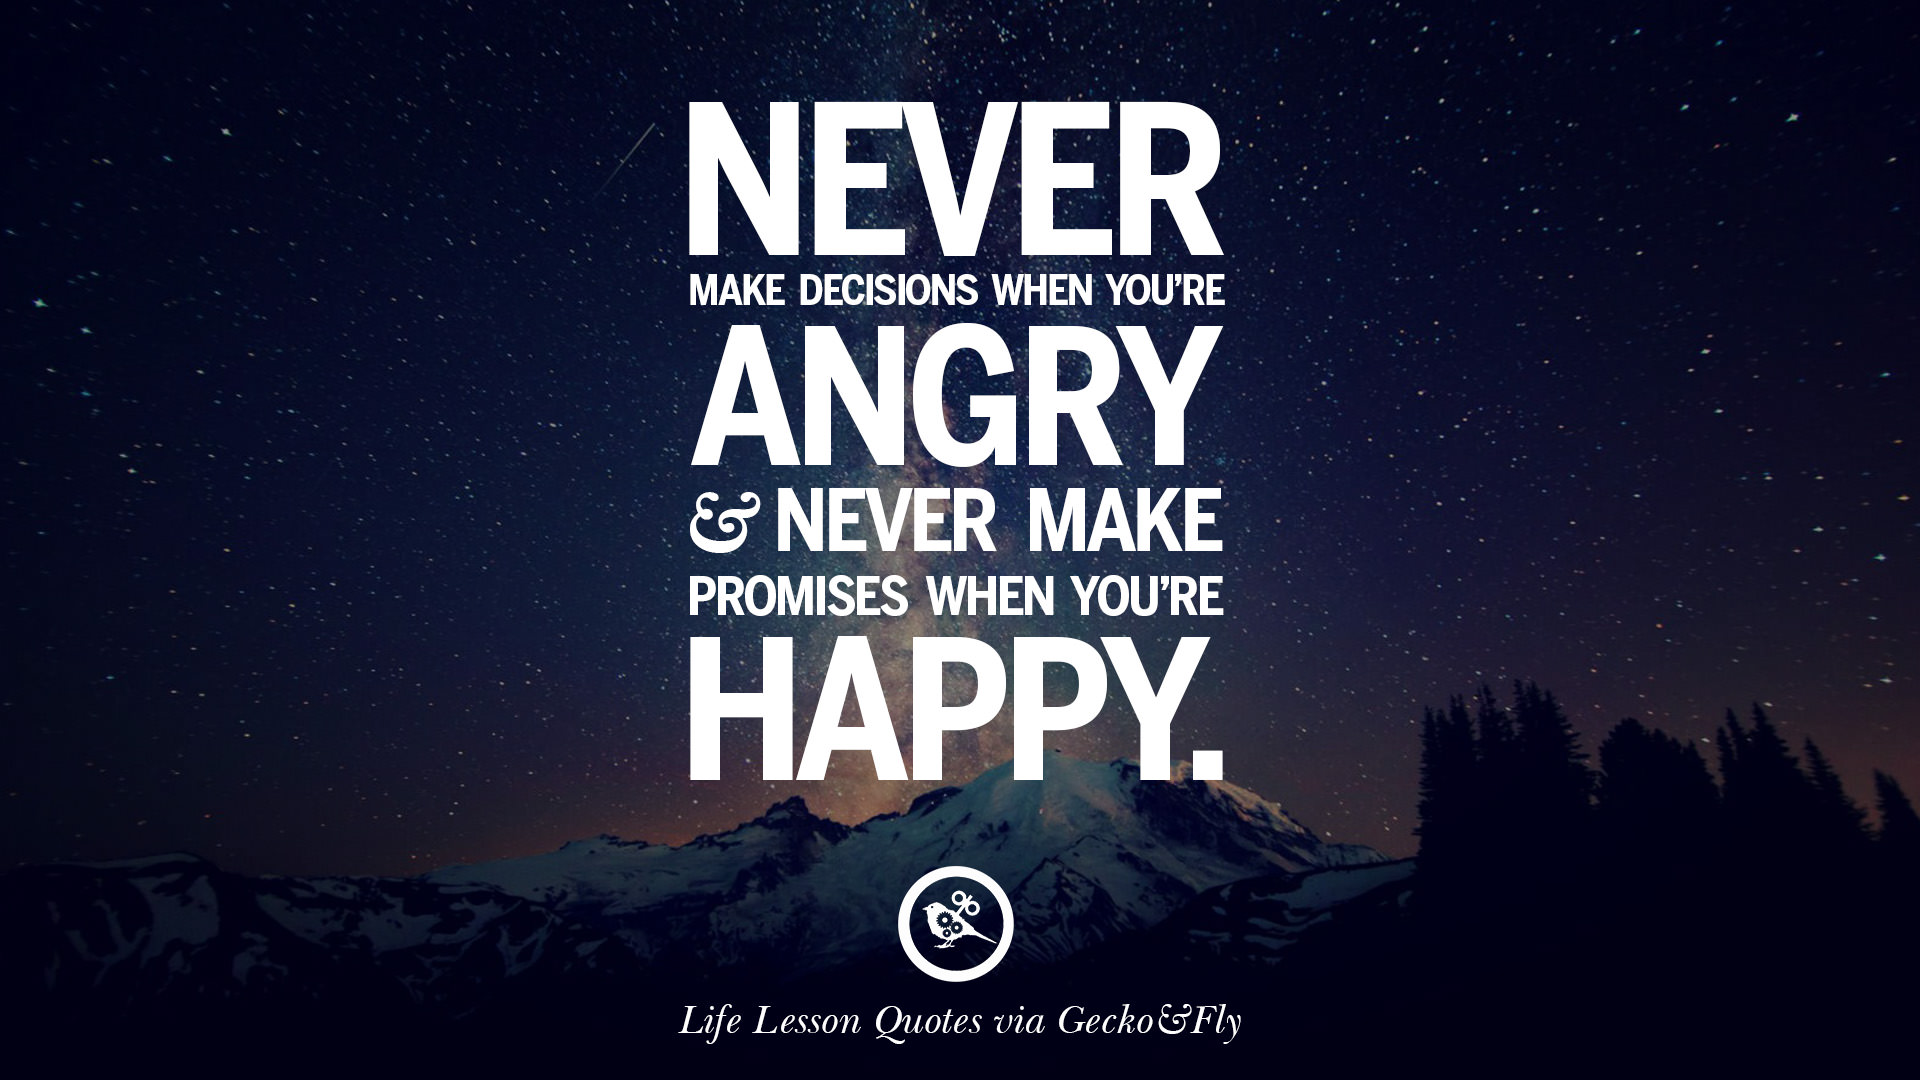 53 Best Lessons For Life Quotes And Disappointments